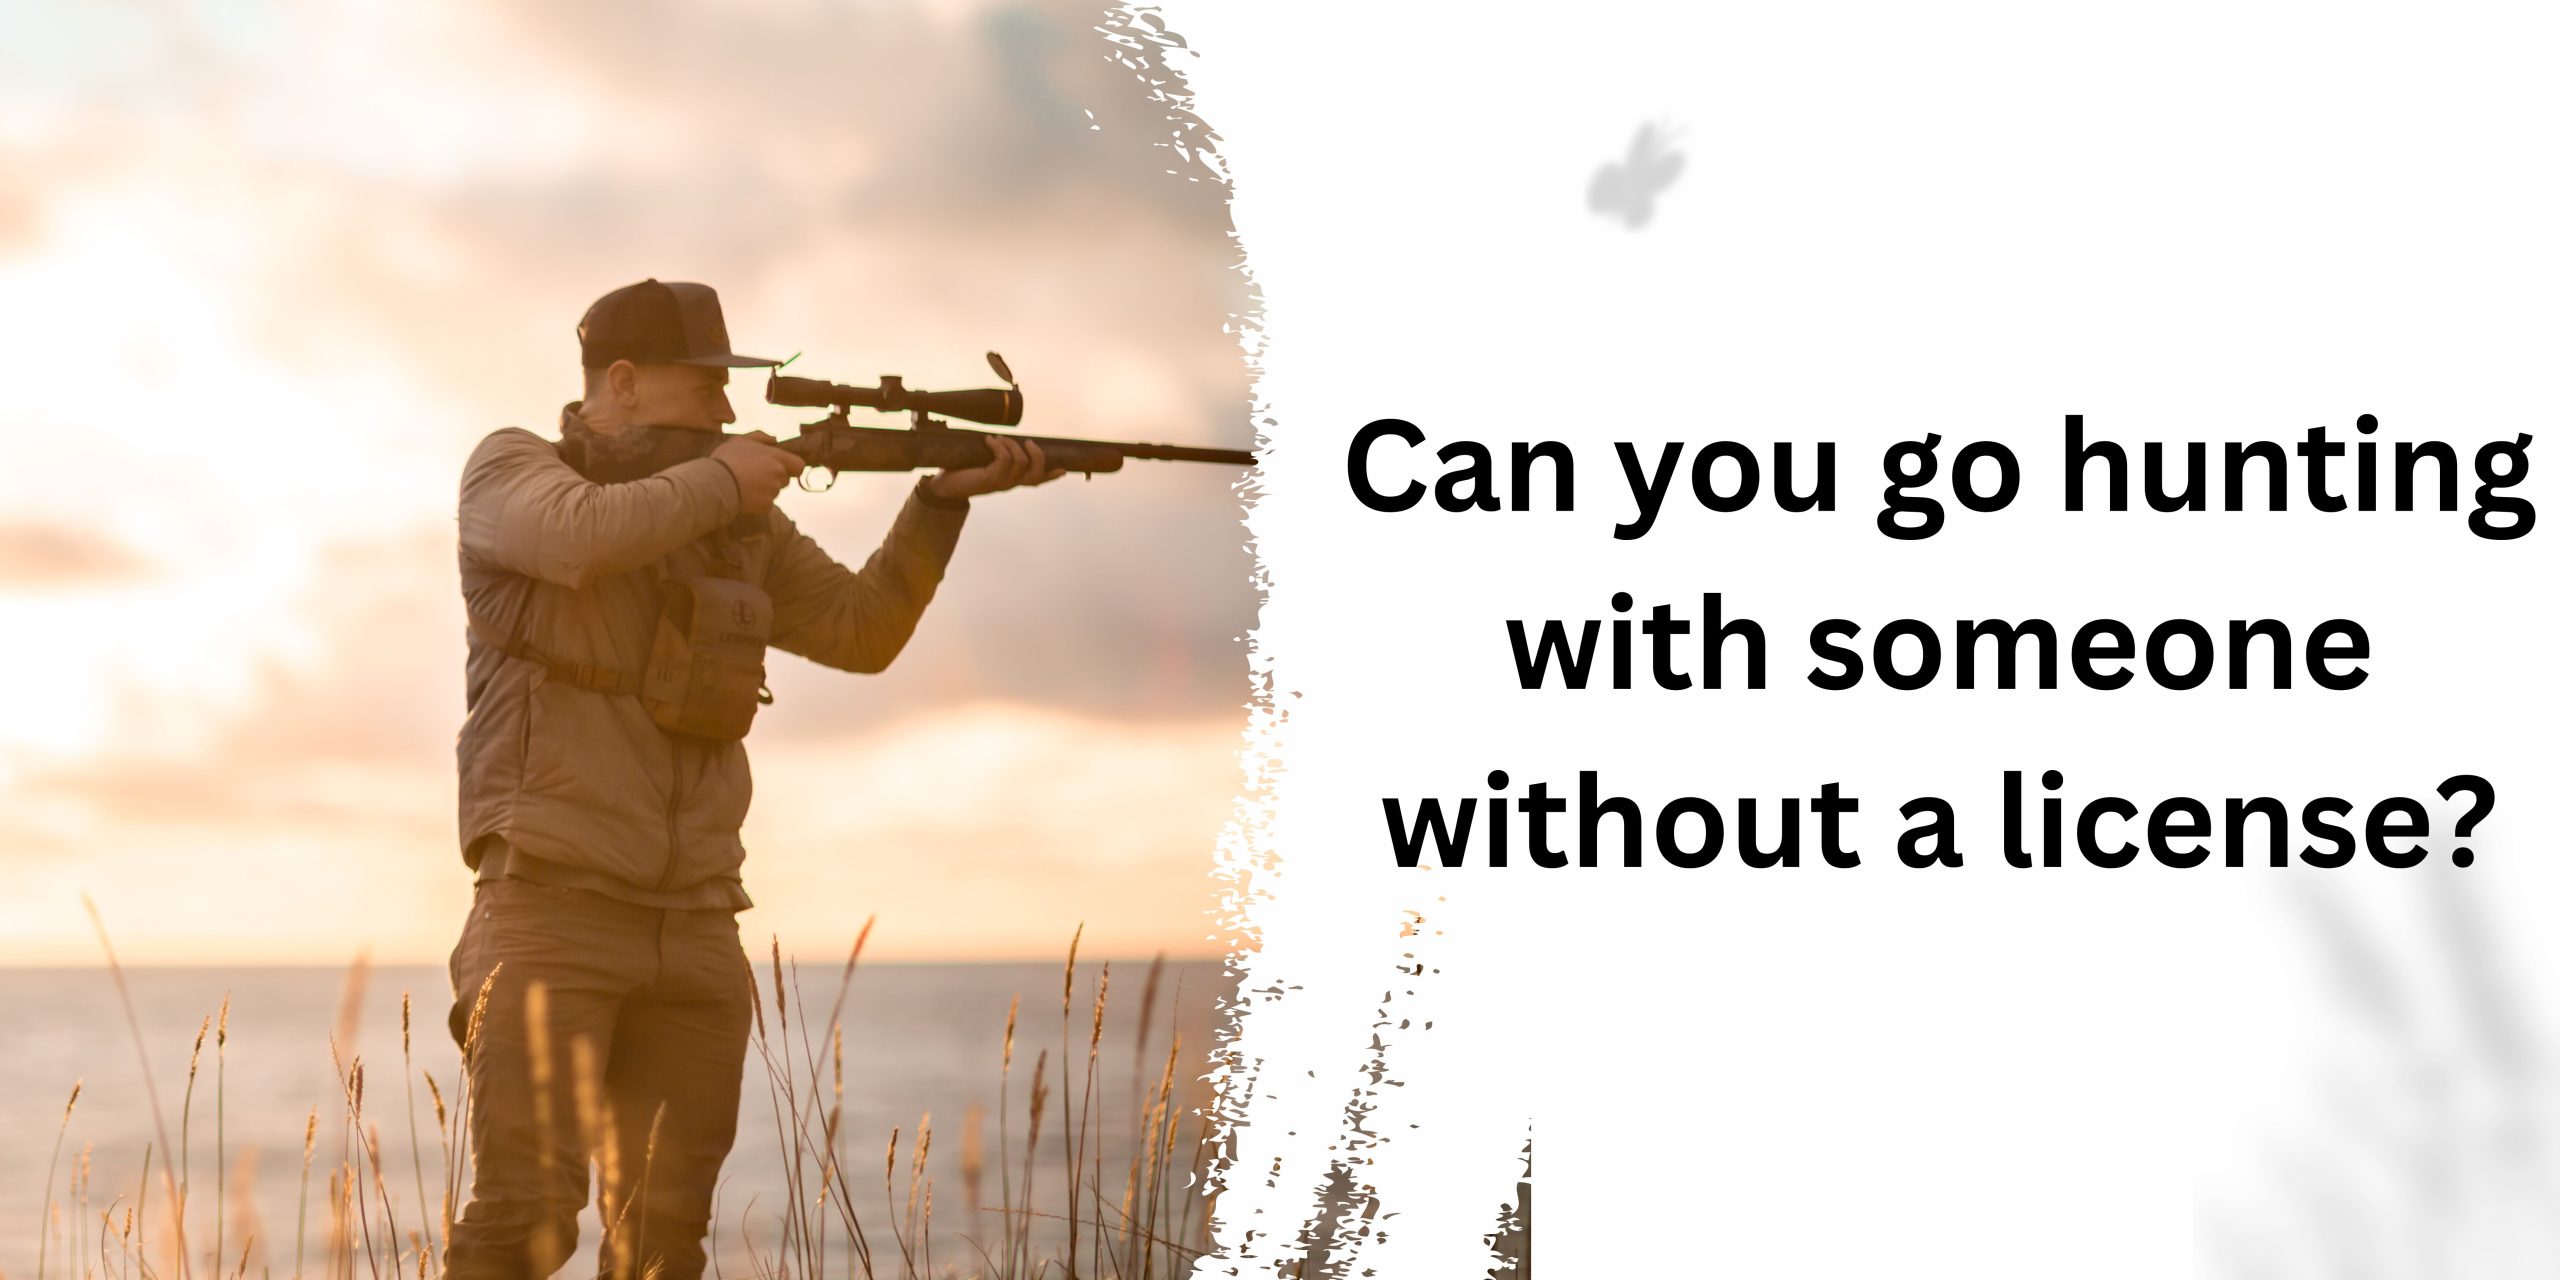 Can you go hunting with someone without a license